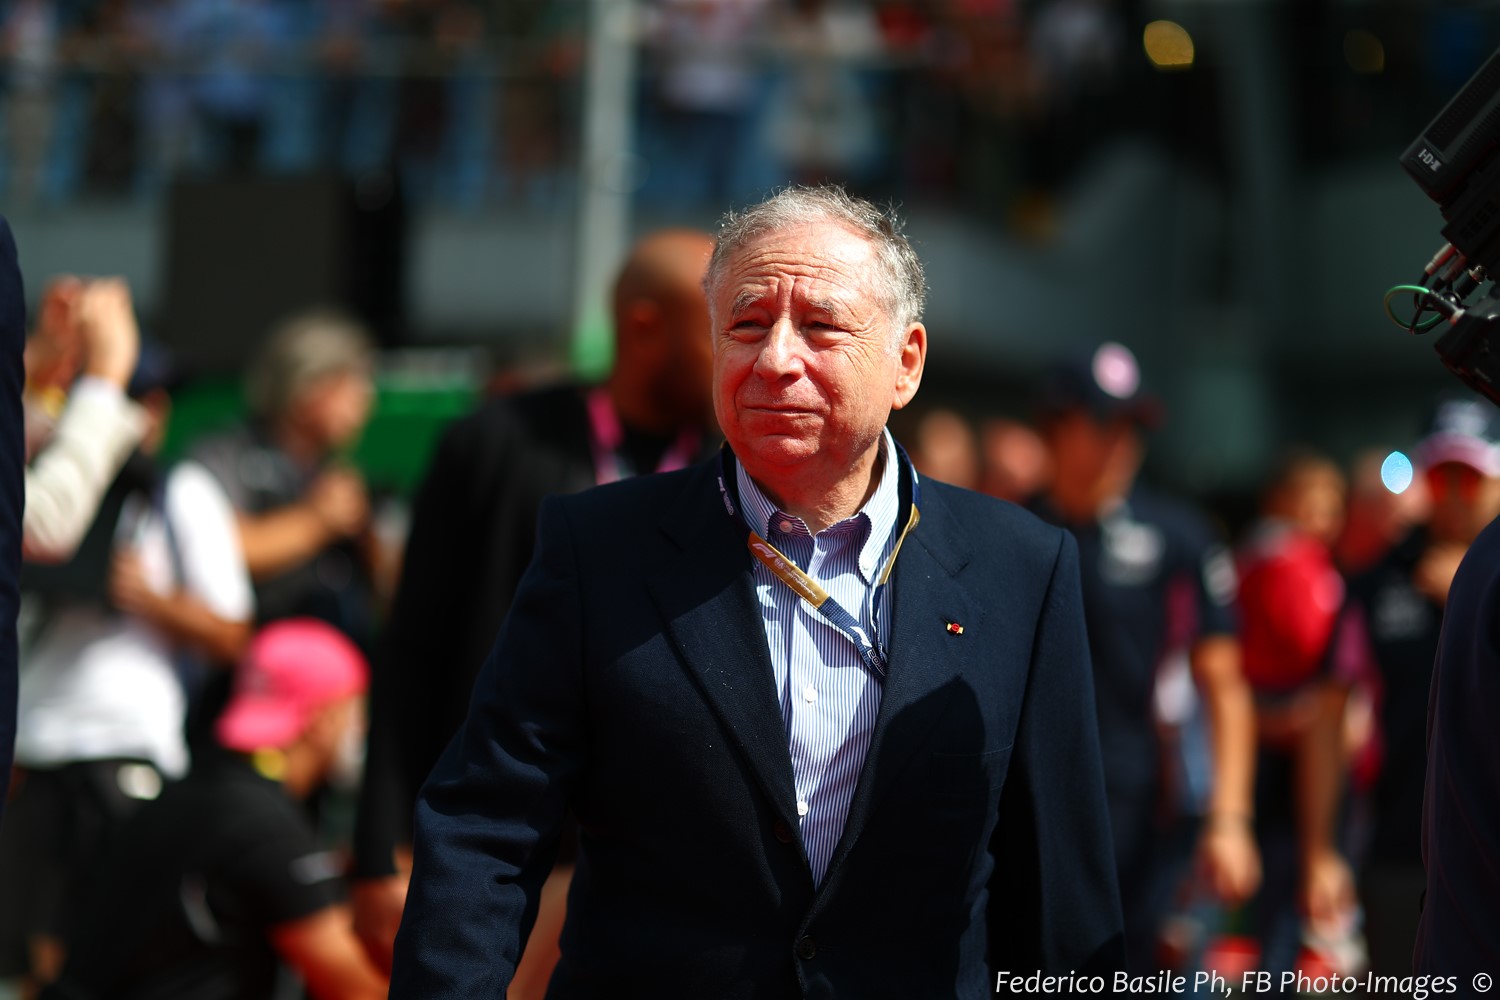 Jean Todt says he sees no credible evidence the Panthera team will amount to anything